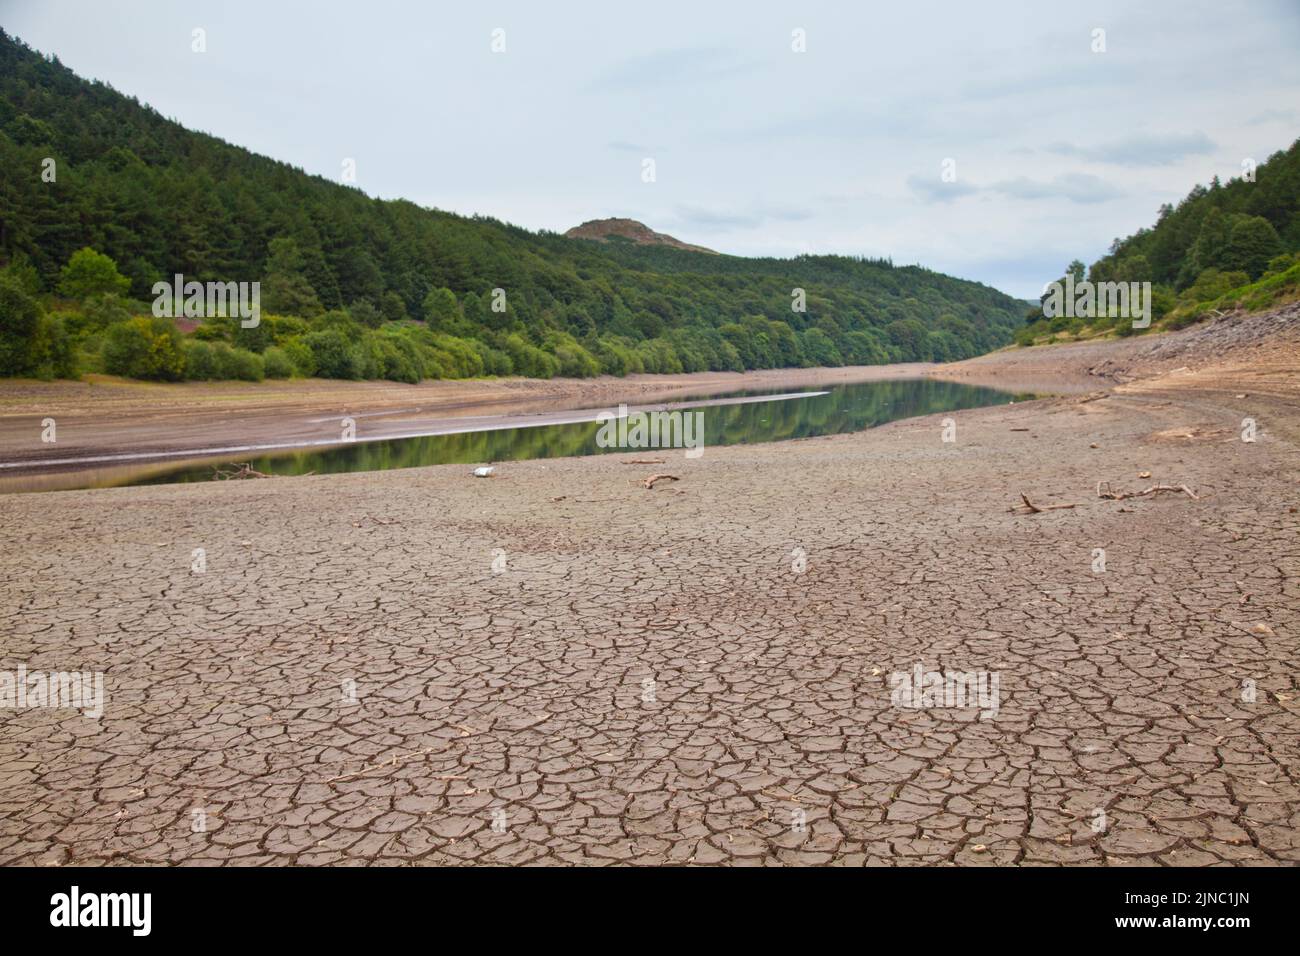 Dry conditions and low level water supplies at Ladybower Reservoir, Peak District, taken during the drought summer 2022 Stock Photo